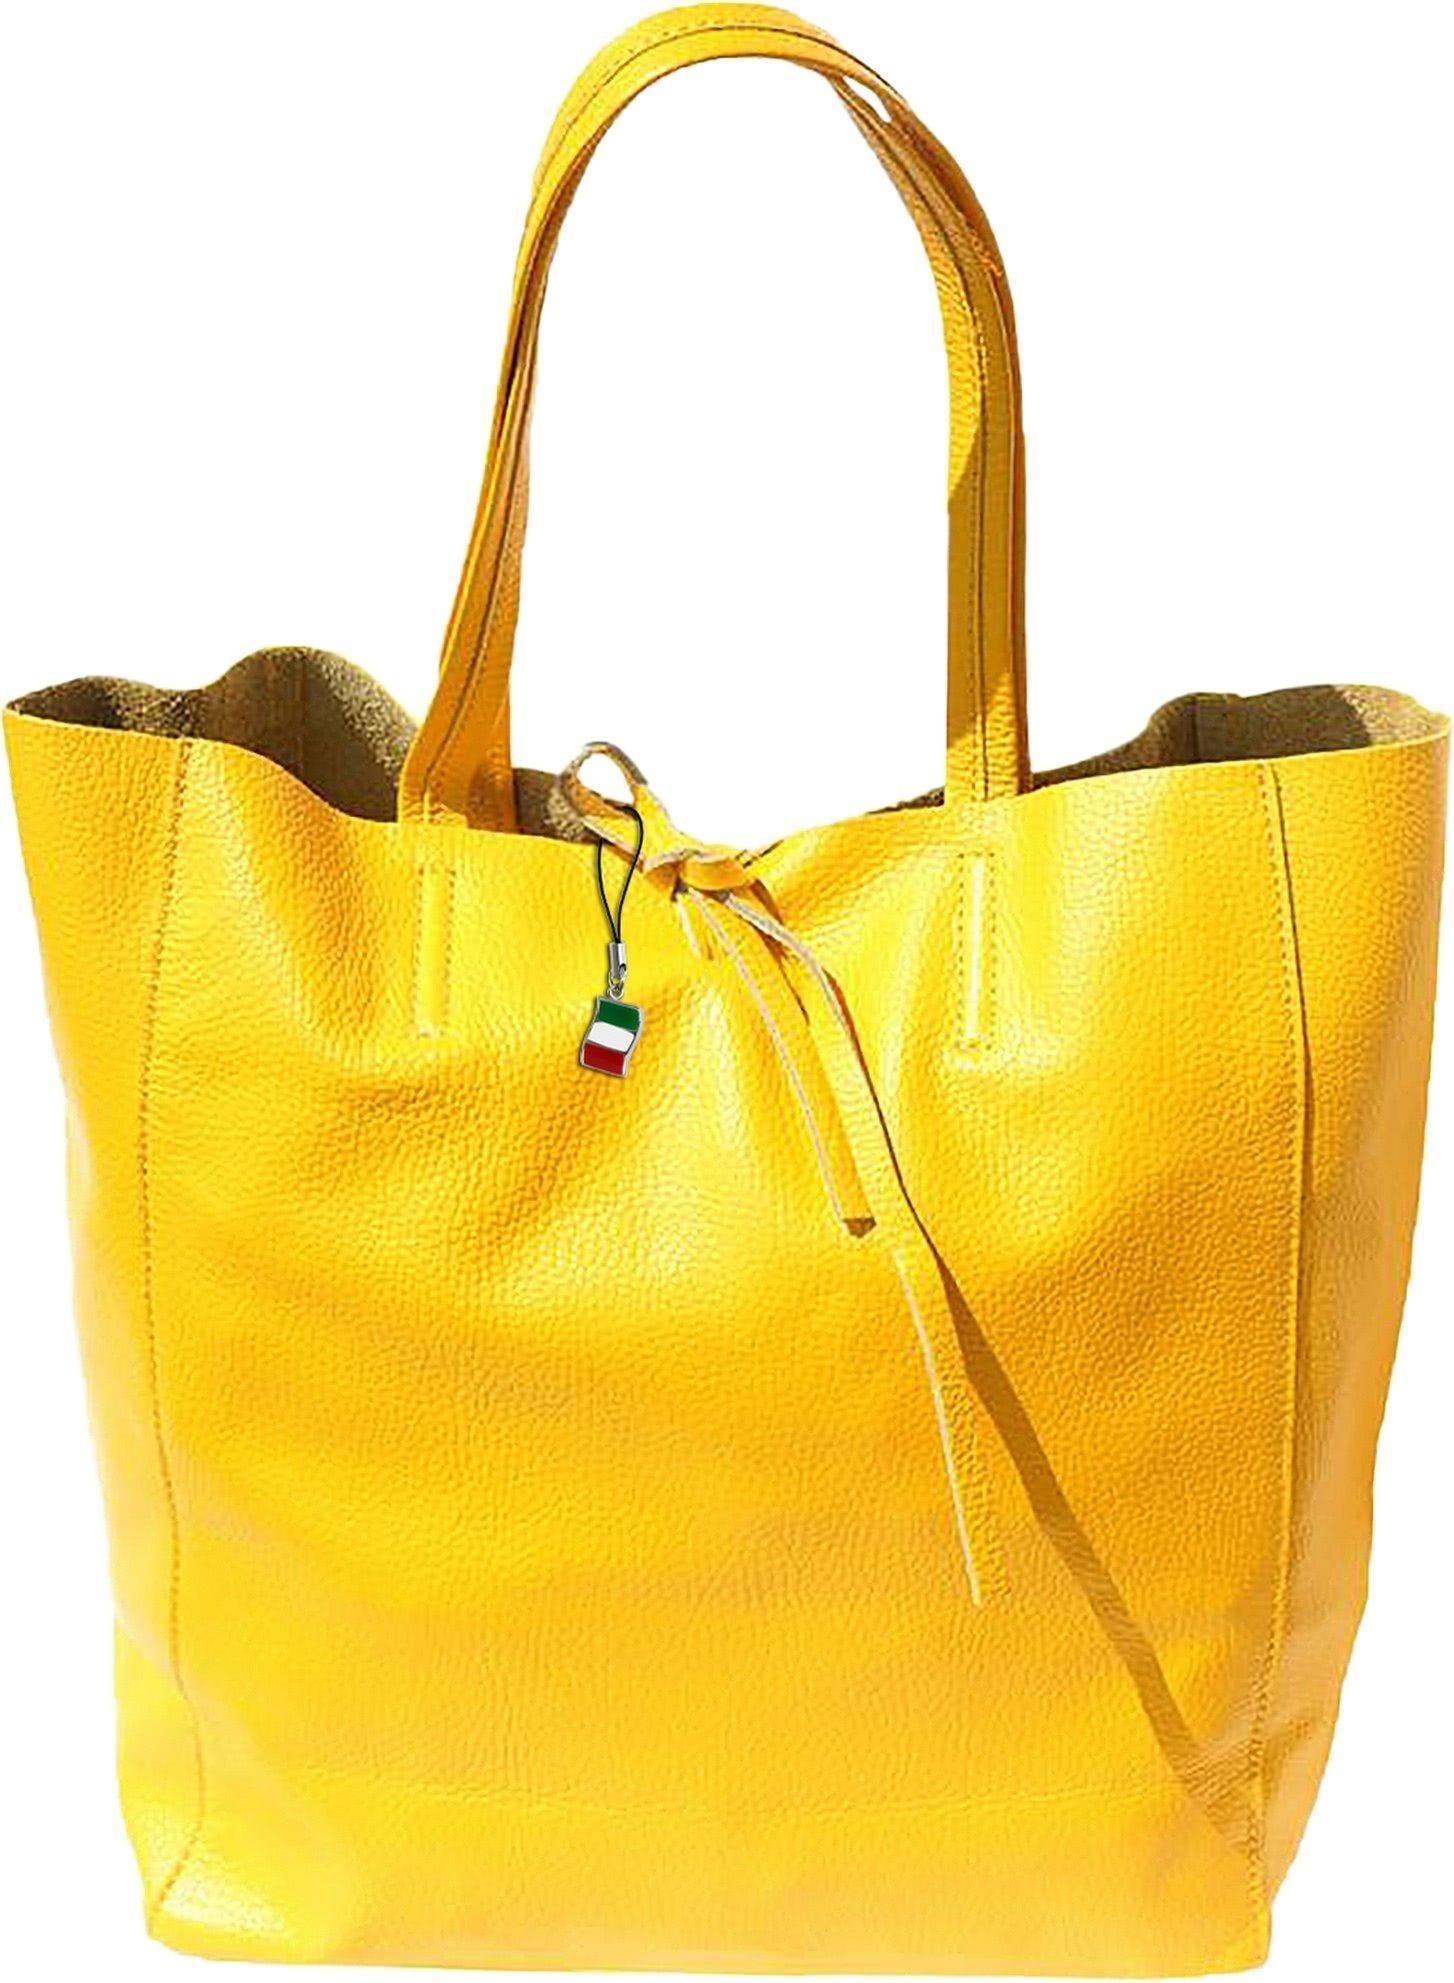 FLORENCE Schultertasche Florence ital. Echtleder Shopper gelb (Shopper), Damen Leder Shopper, Schultertasche, gelb ca. 30cm